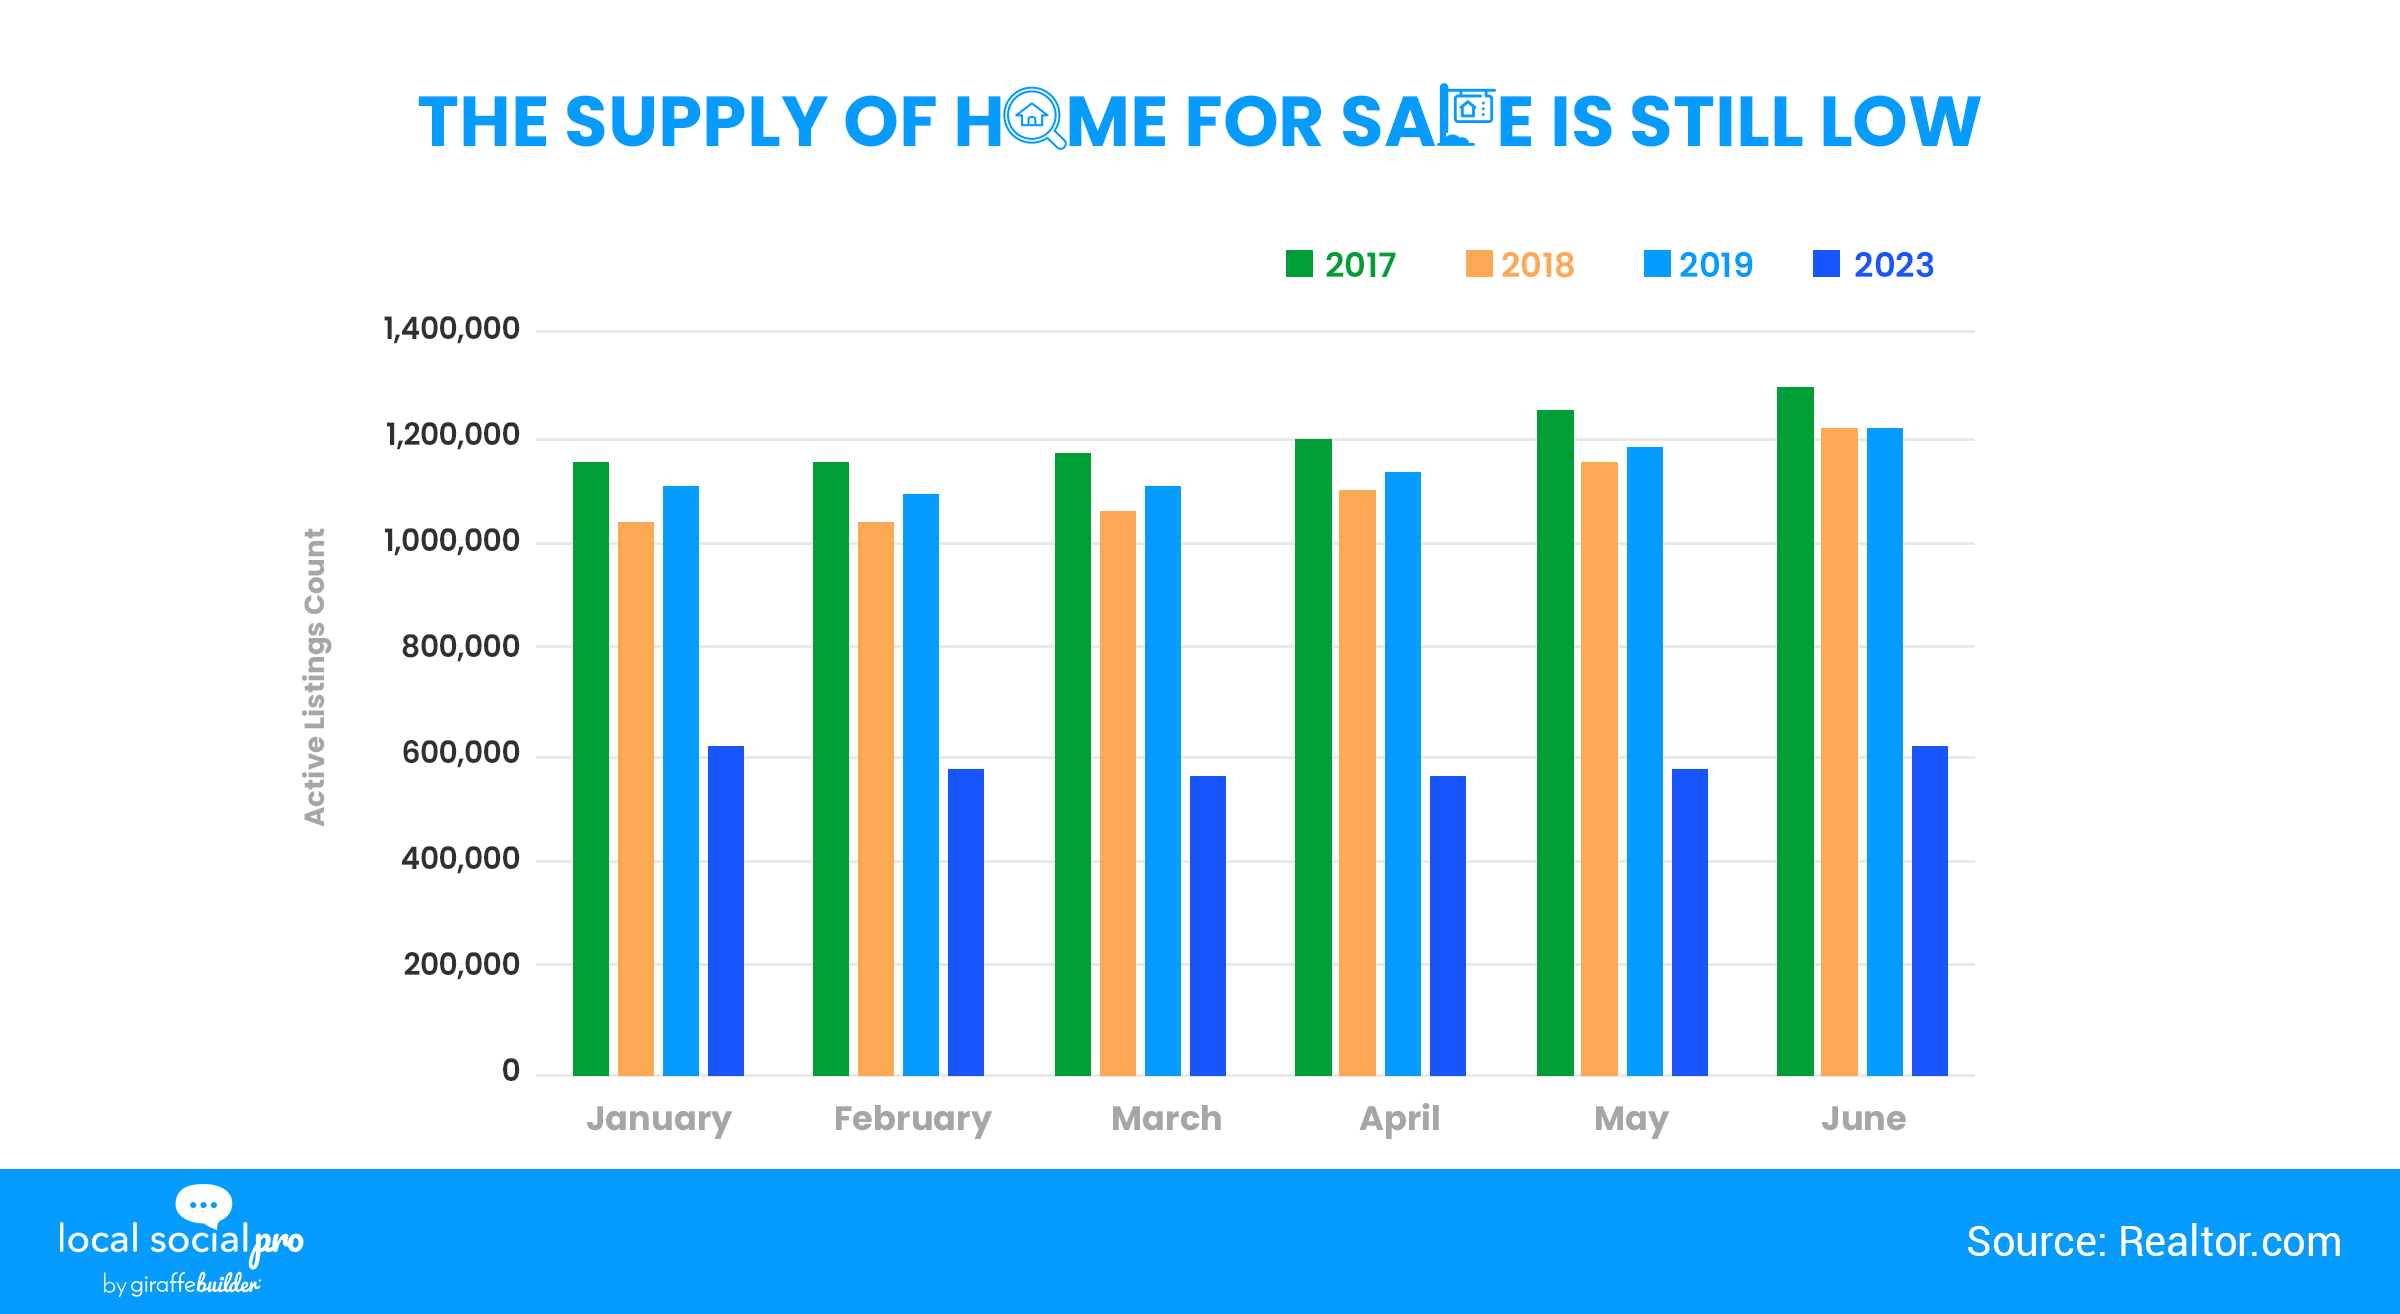 The Supply of Homes For Sale Is Still Low